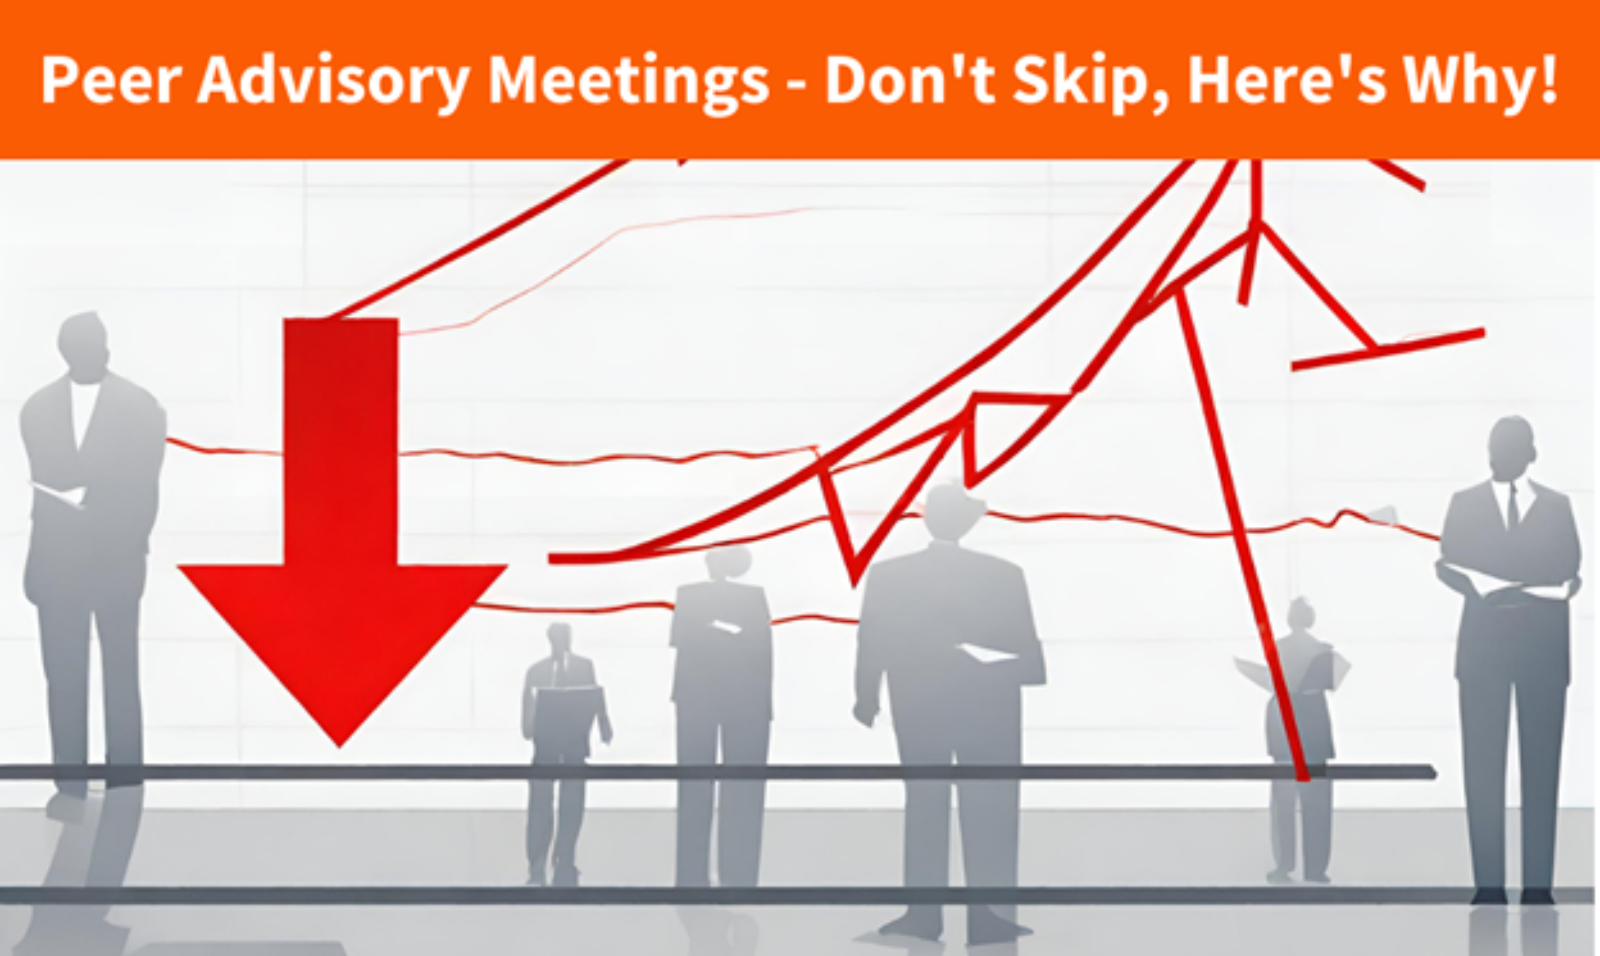 MythBusters: Why Skipping Peer Advisory Meetings Hurts Your Business (More Than You Think)